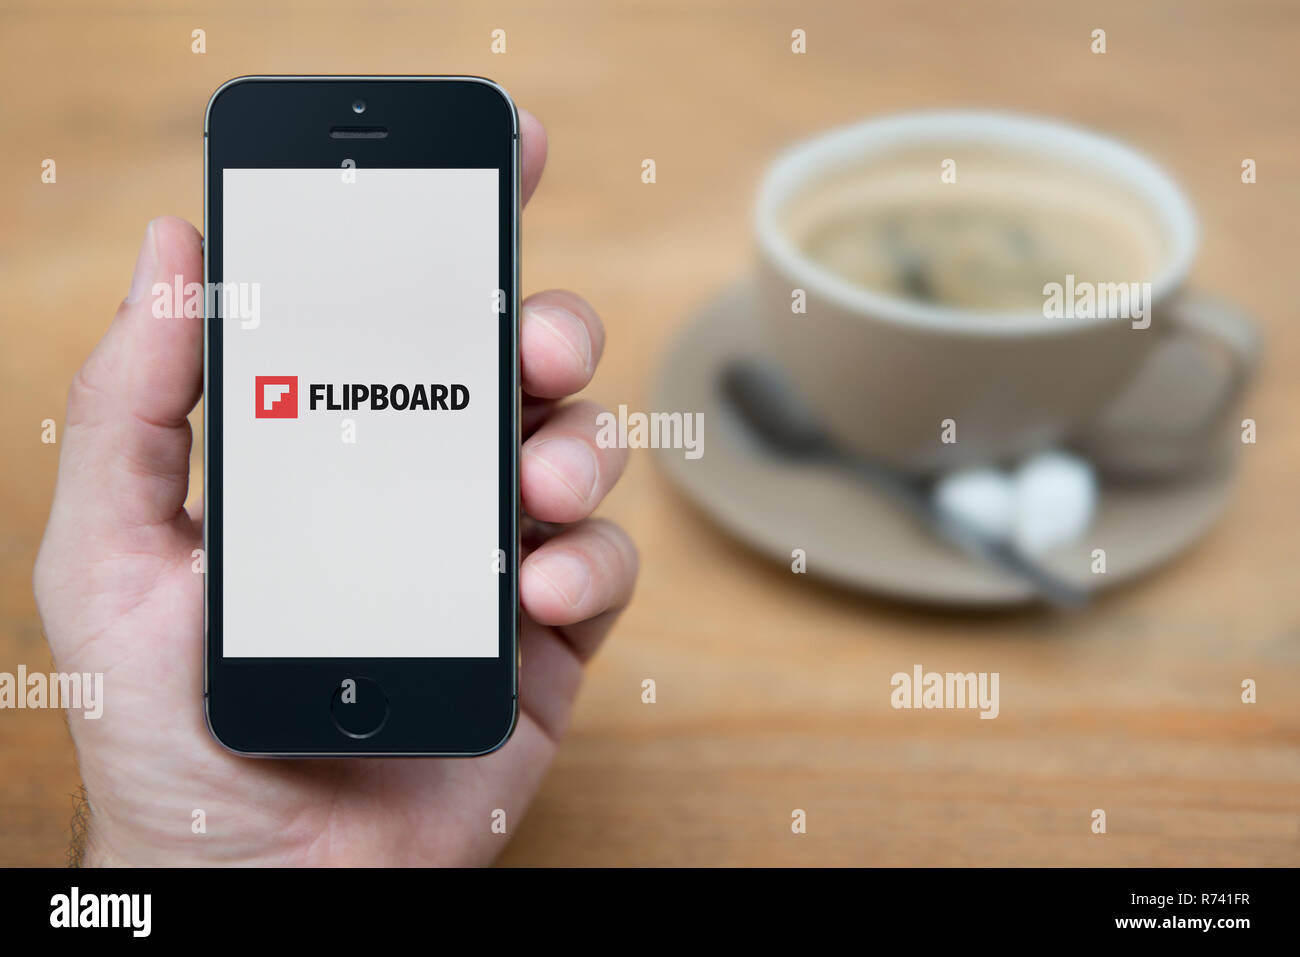 A man looks at his iPhone which displays the Flipboard logo (Editorial use only). Stock Photo